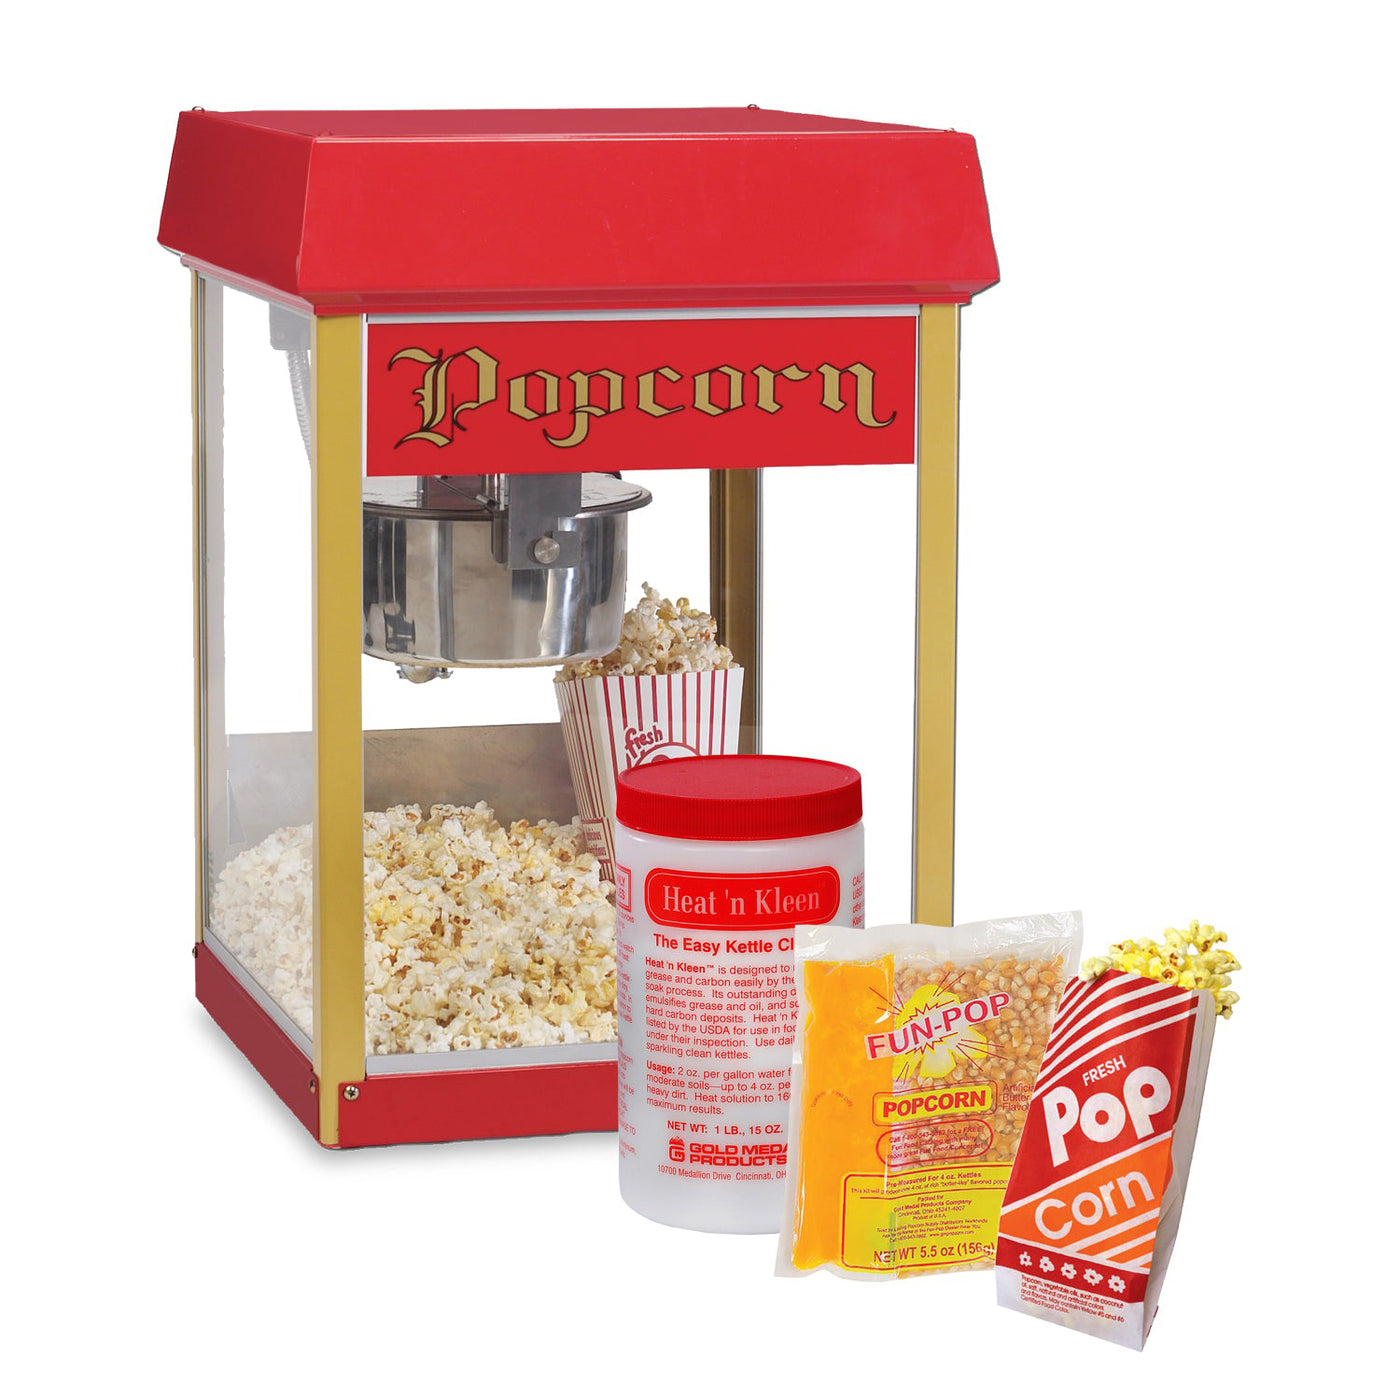 Popcorn Equipment Accessories & Supplies Starter Package for a 4